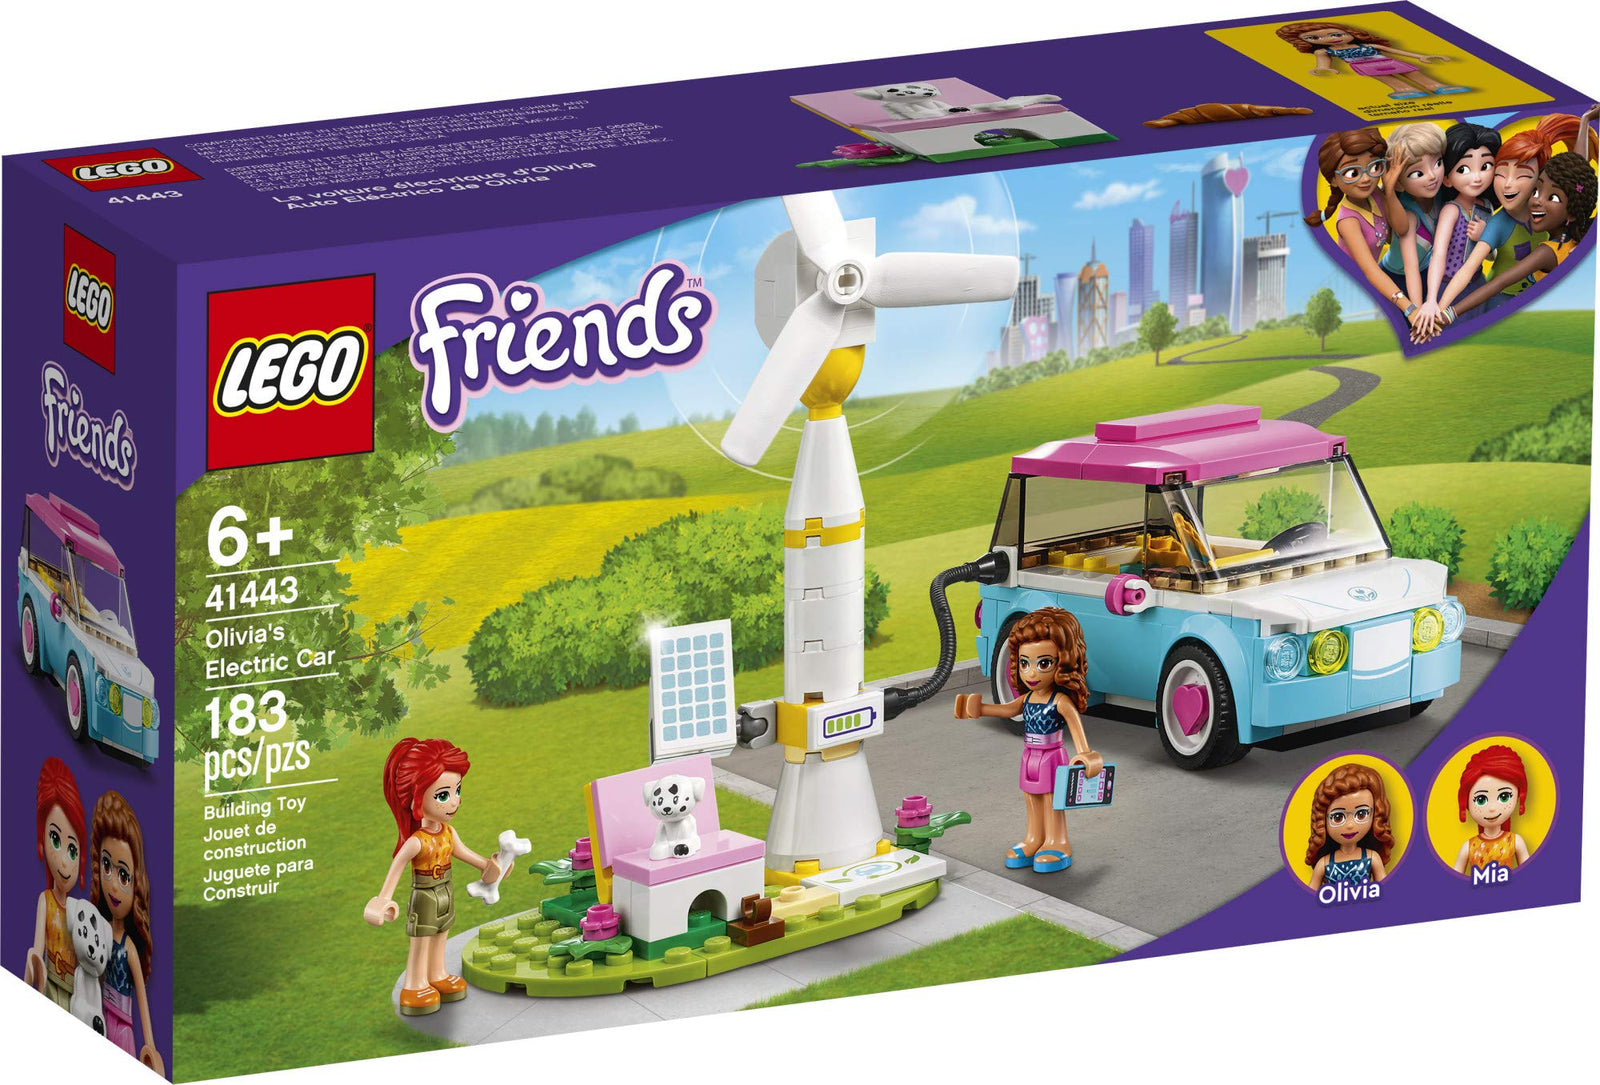 LEGO Friends Olivia's Electric Car 41443 Building Kit; Creative Gift for Kids; New Toy Inspires Modern Living Play, New 2021 (183 Pieces)